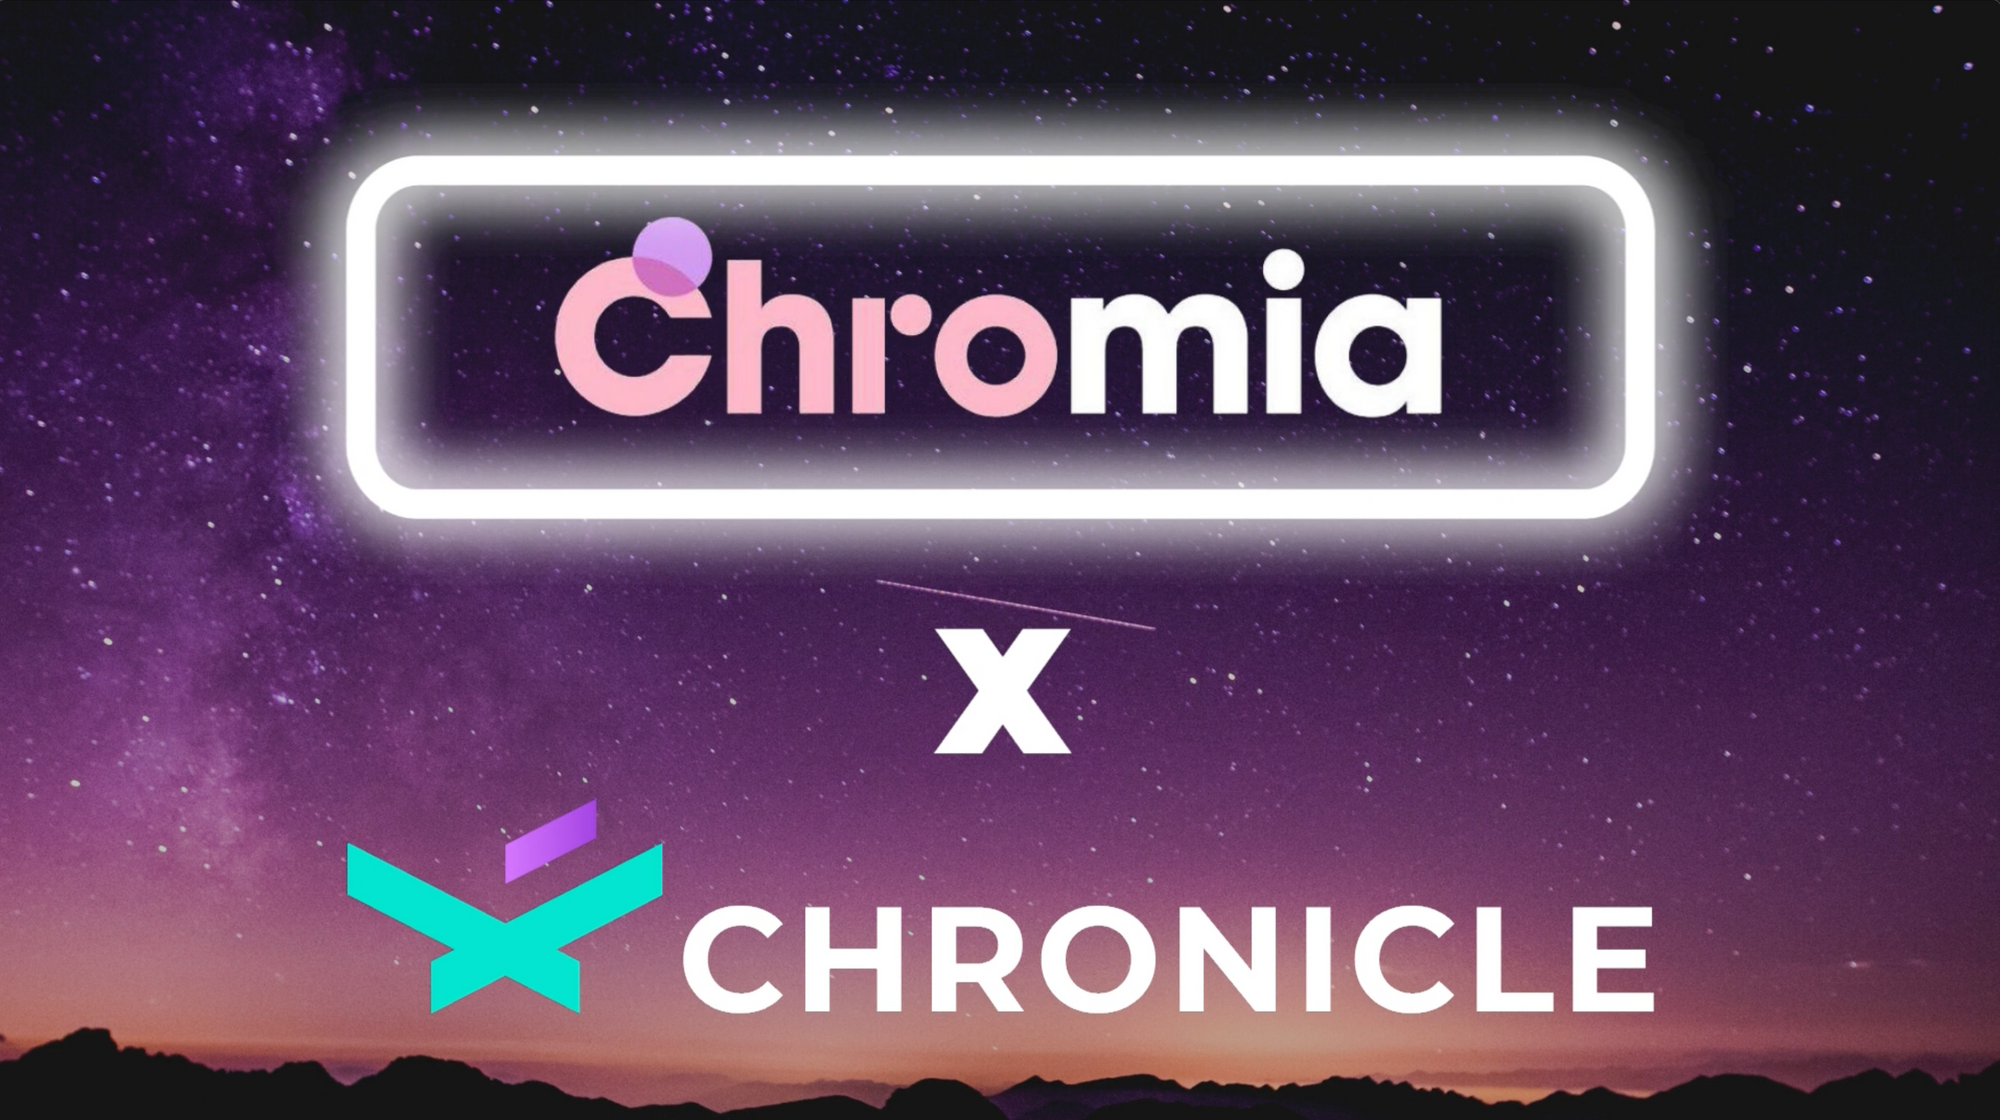 Chromia will be adding Chronicle to its list of partners